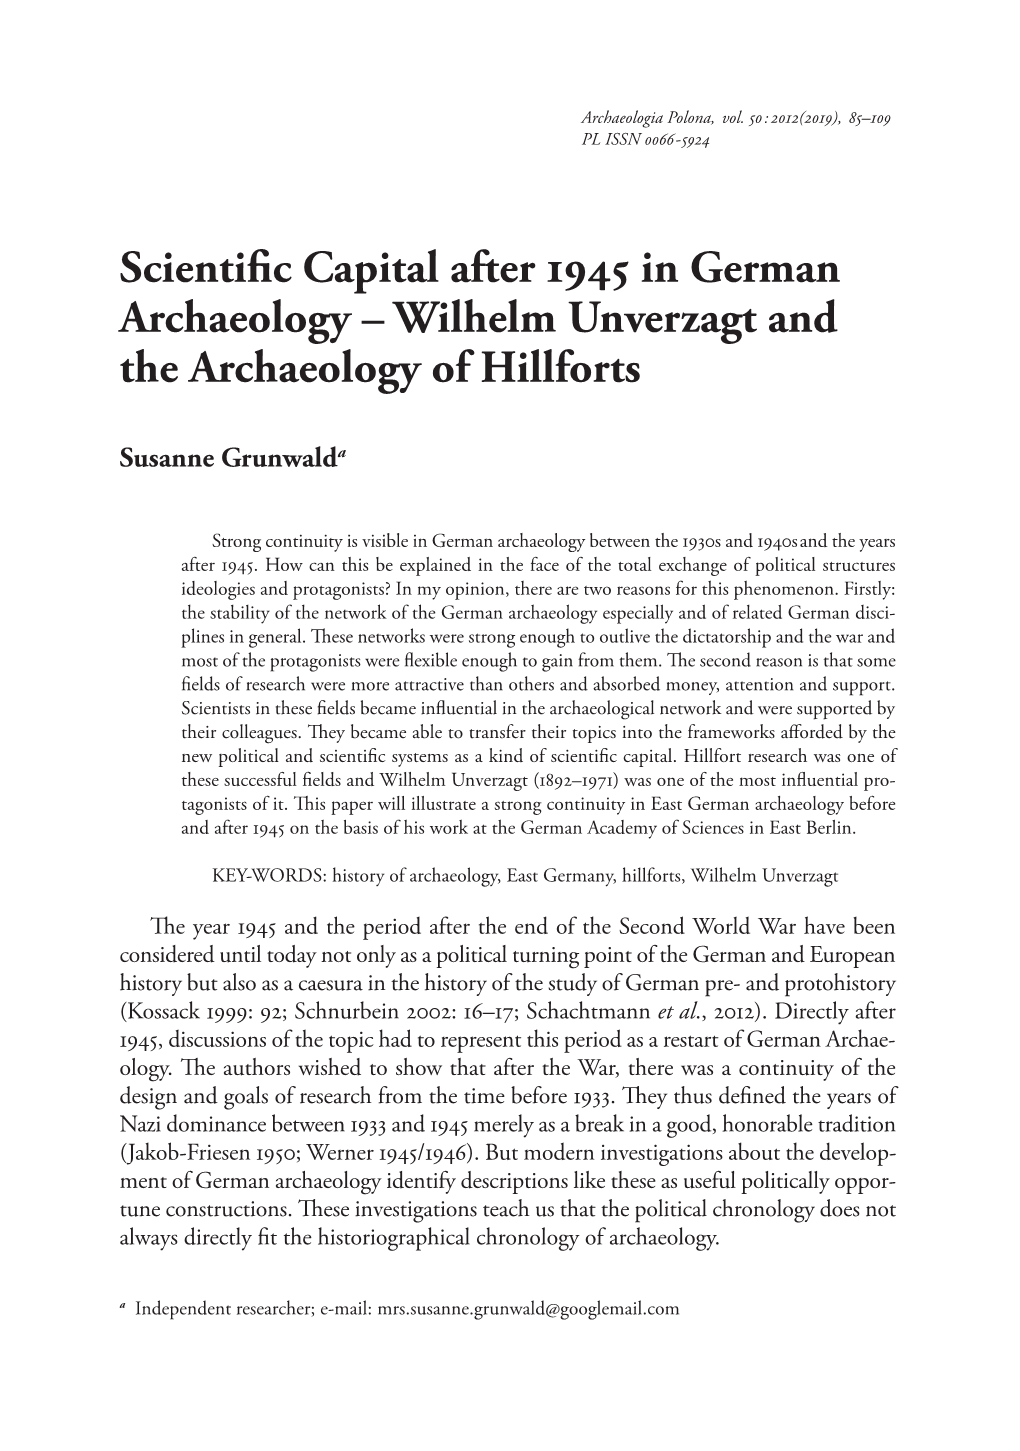 Scientific Capital After 1945 in German Archaeology – Wilhelm Unverzagt and the Archaeology of Hillforts